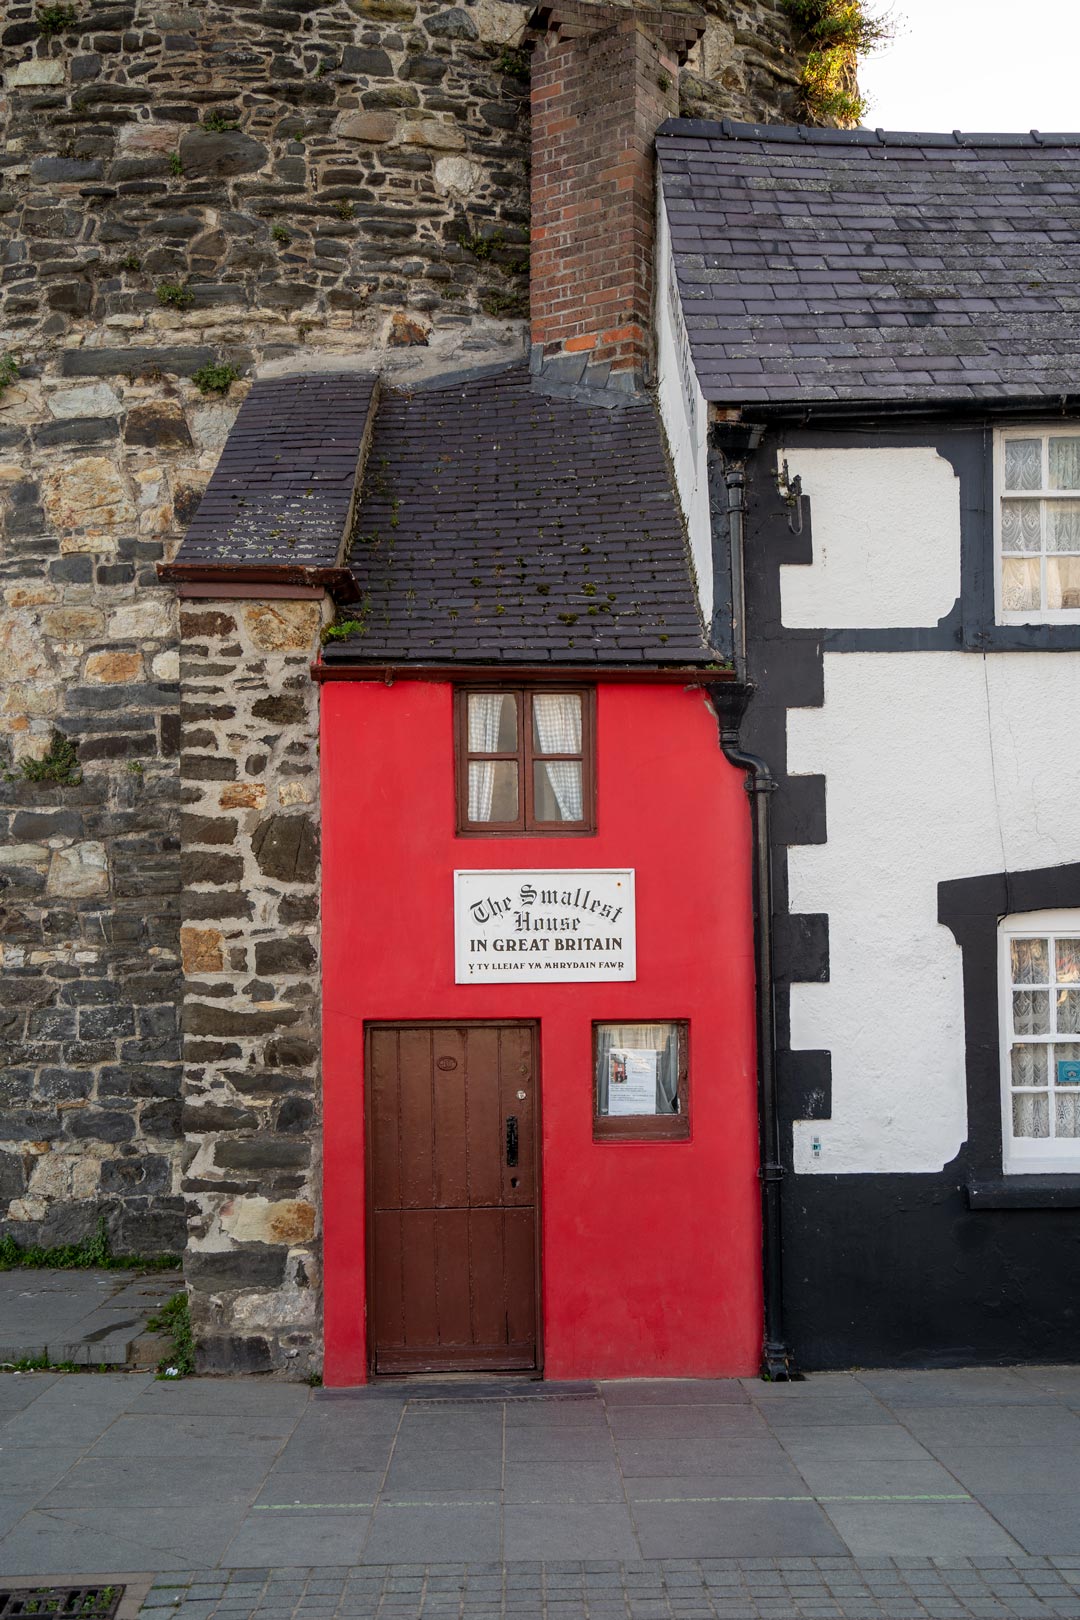 Conwy, Wales, smallest house in Britain